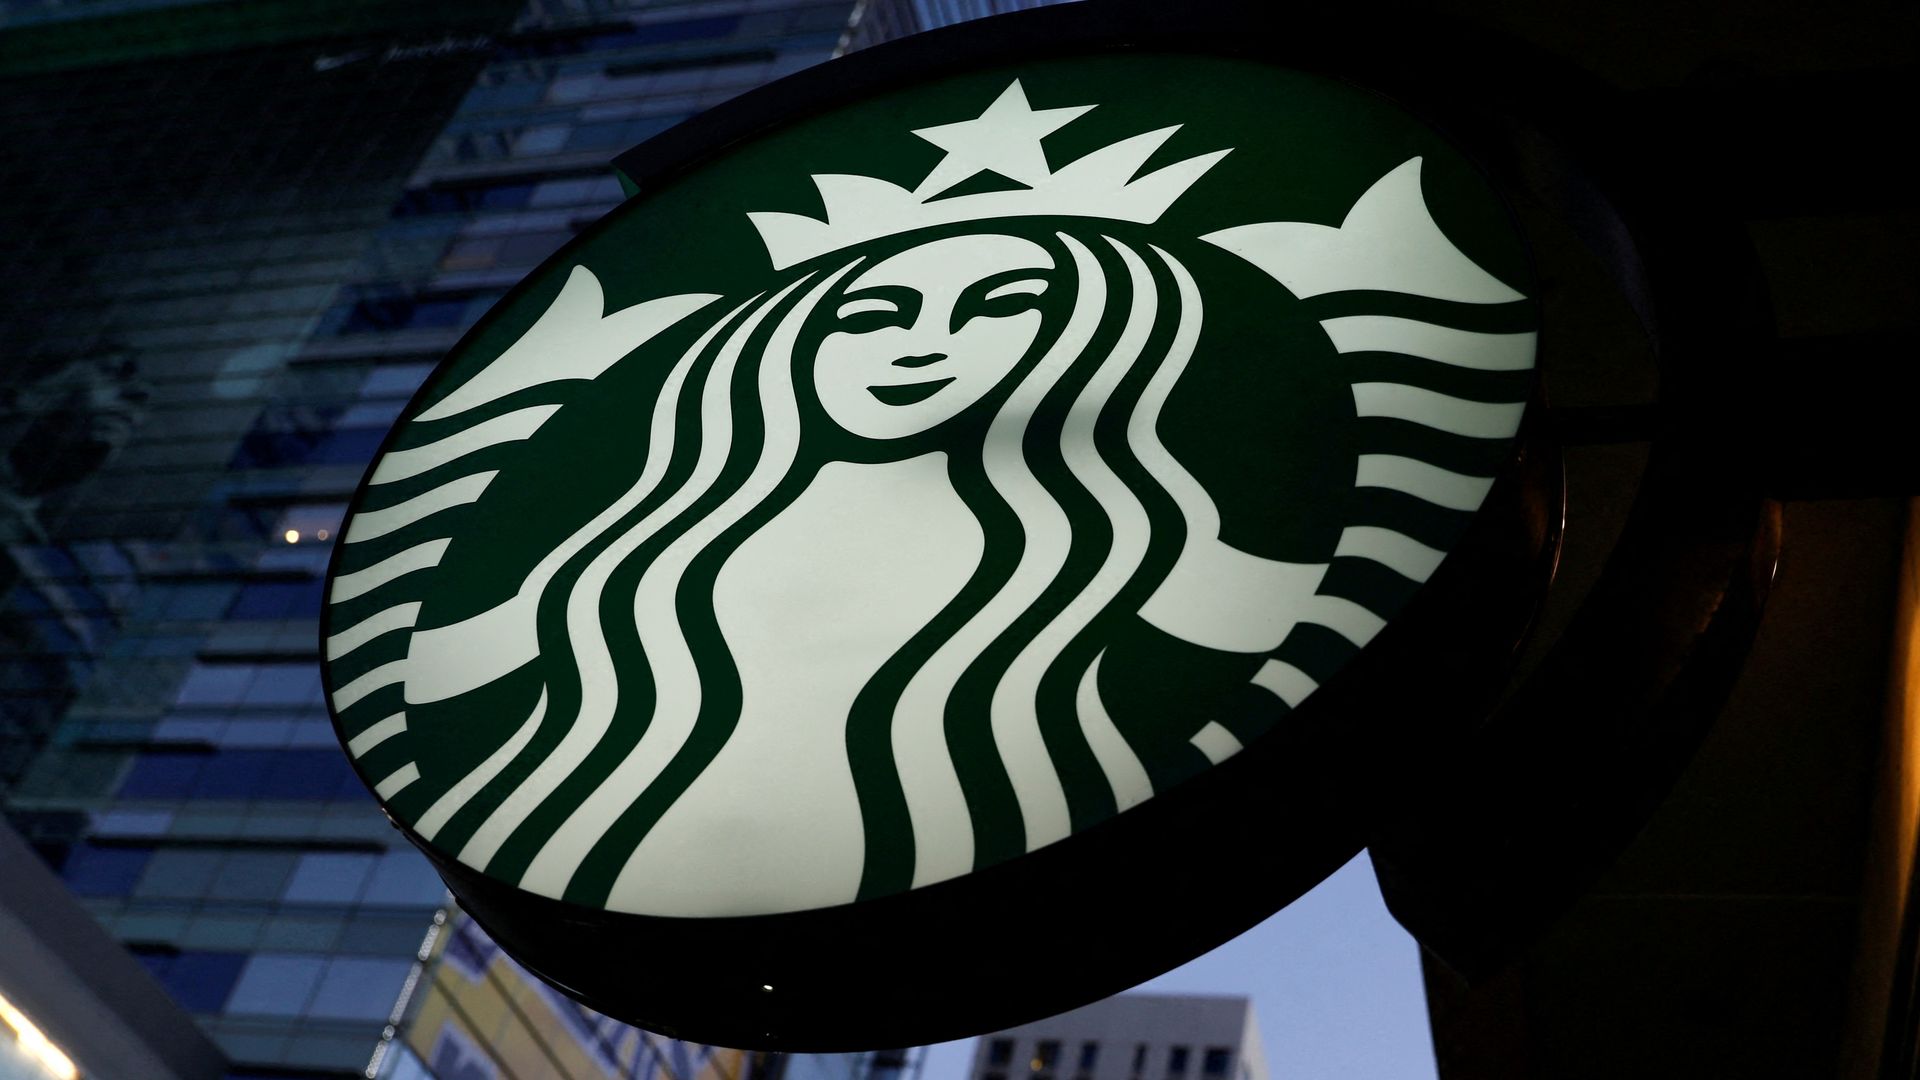 A New Jersey federal judge ordered Starbucks to pay an additional .7 million to settle a wrongful termination lawsuit.